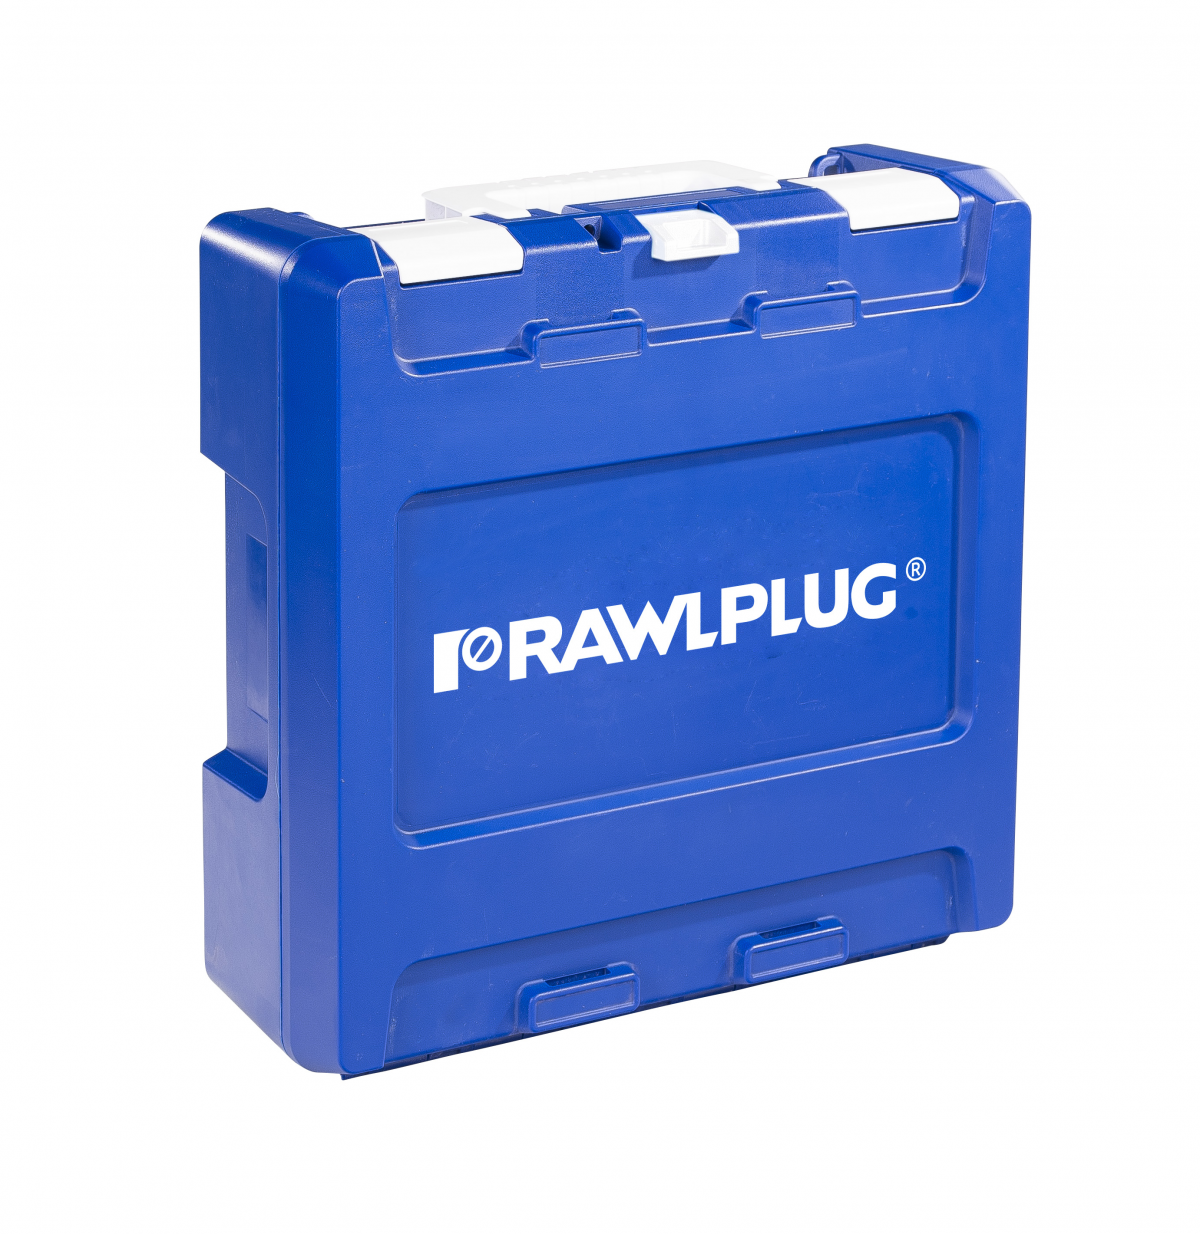 R-PRH18-S Cordless RawlHammer 18V SDS plus bare tool, in a transport case